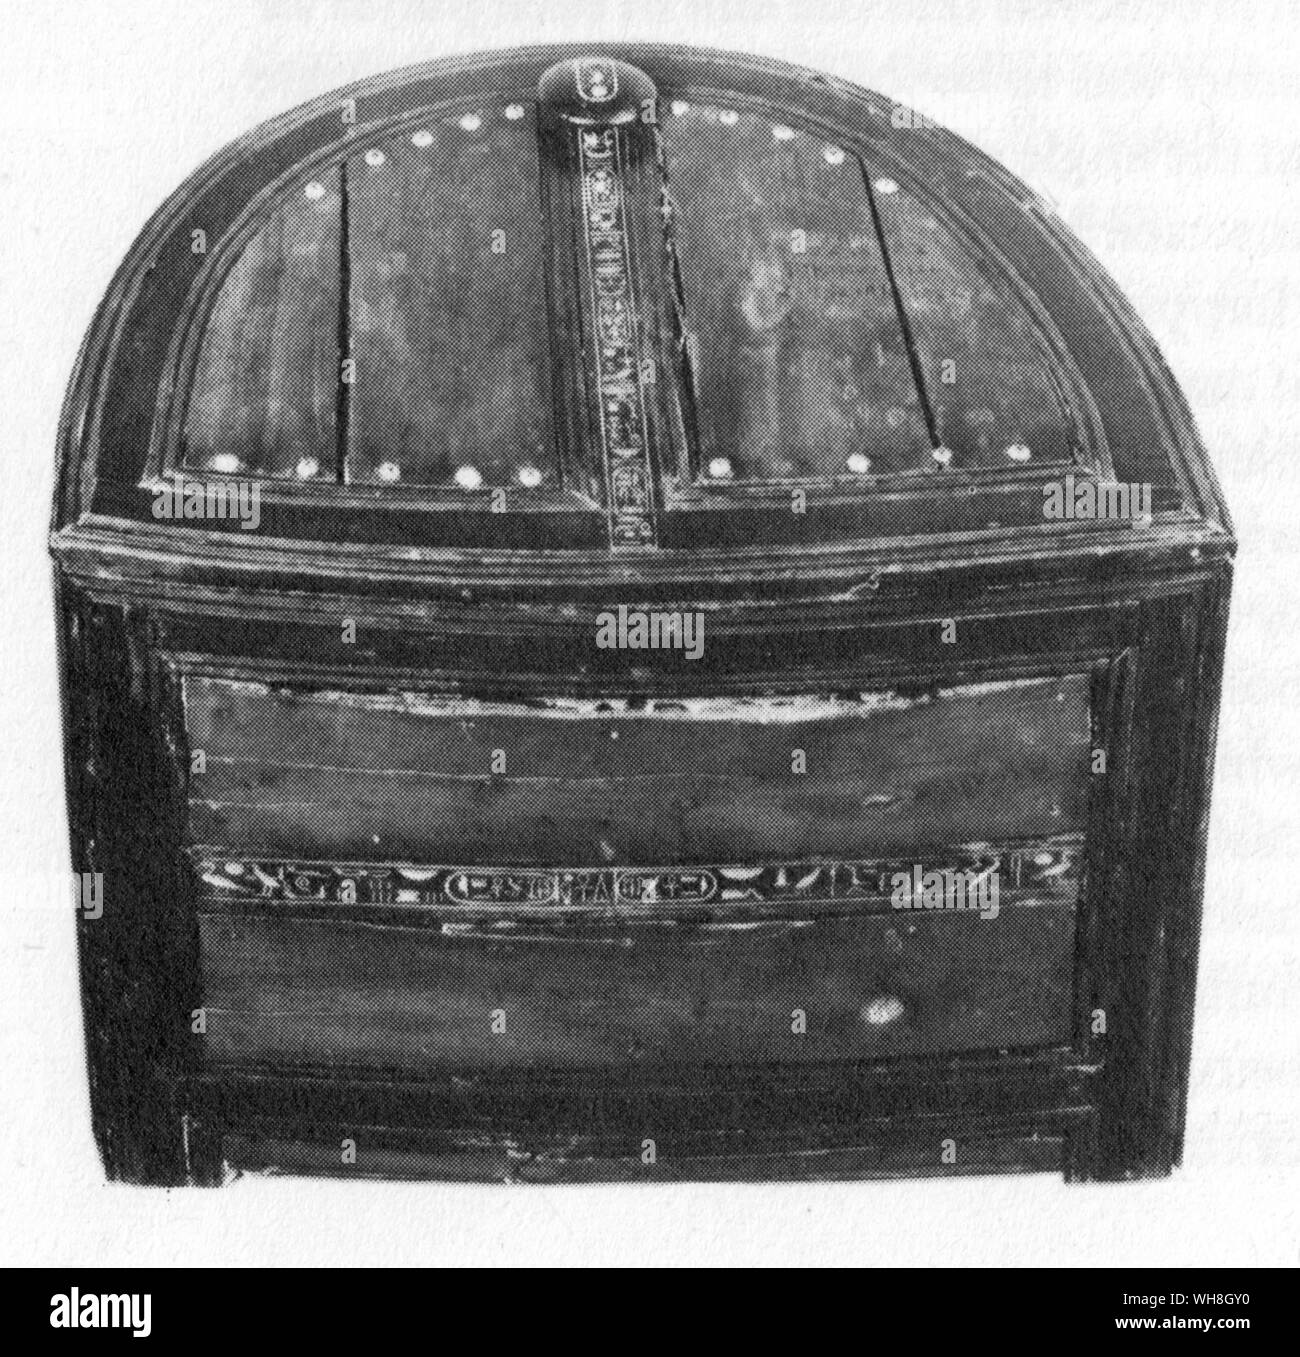 Bow fronted box found in Tutankhamen's tomb. The Treasures of Tutankhamen, The Exhibition Catalogue by  I E S Edwards, page 97. Stock Photo